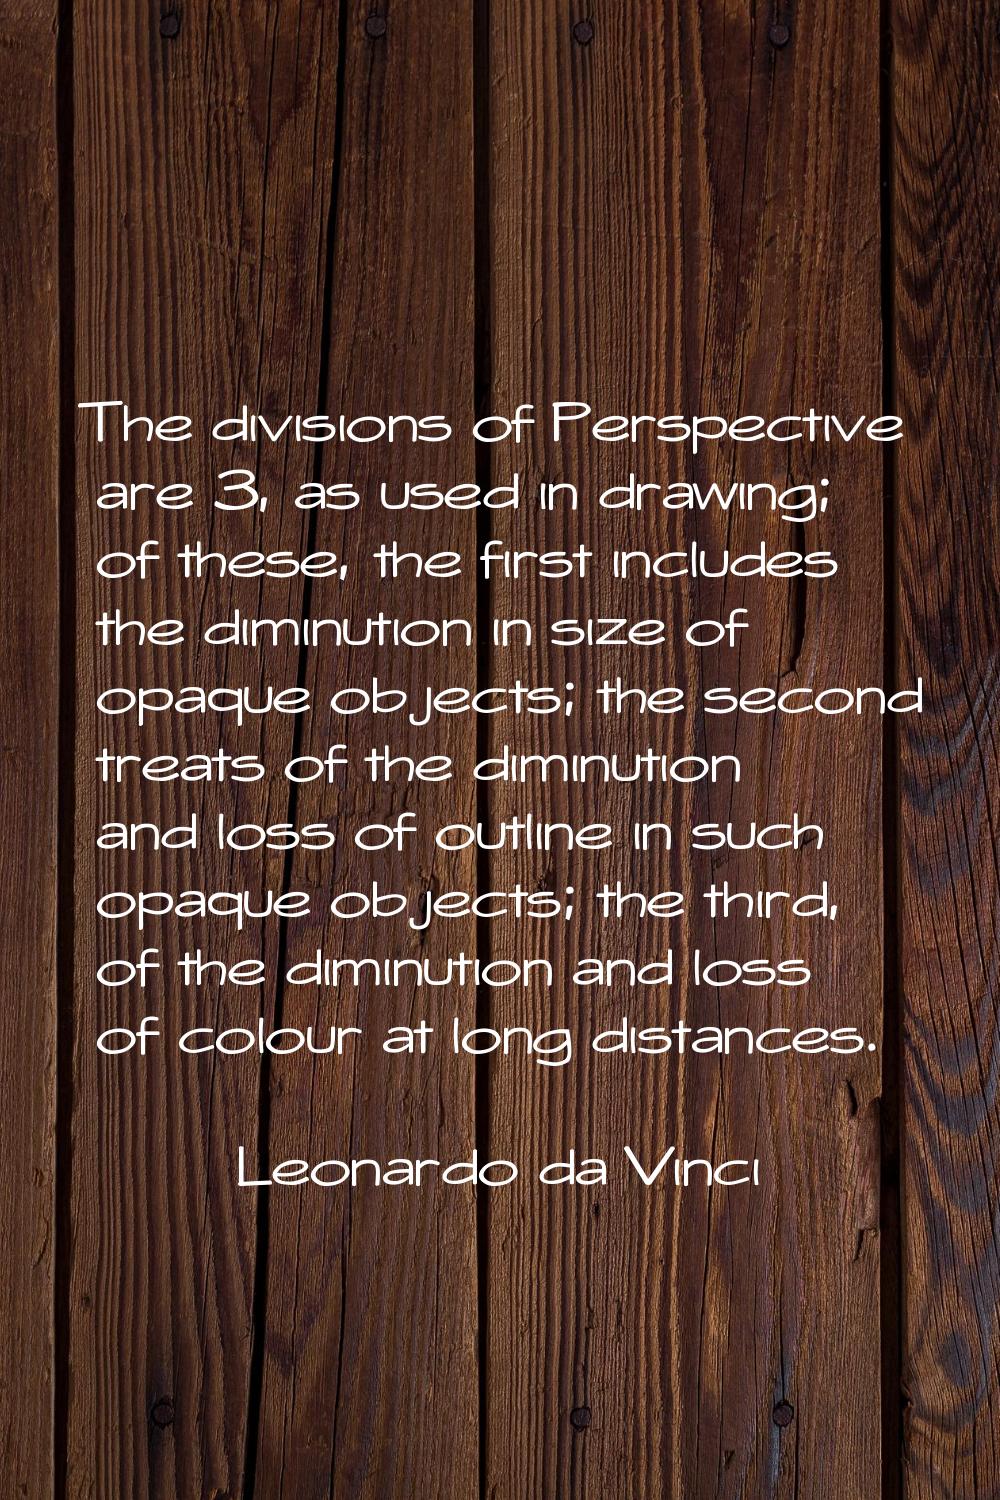 The divisions of Perspective are 3, as used in drawing; of these, the first includes the diminution